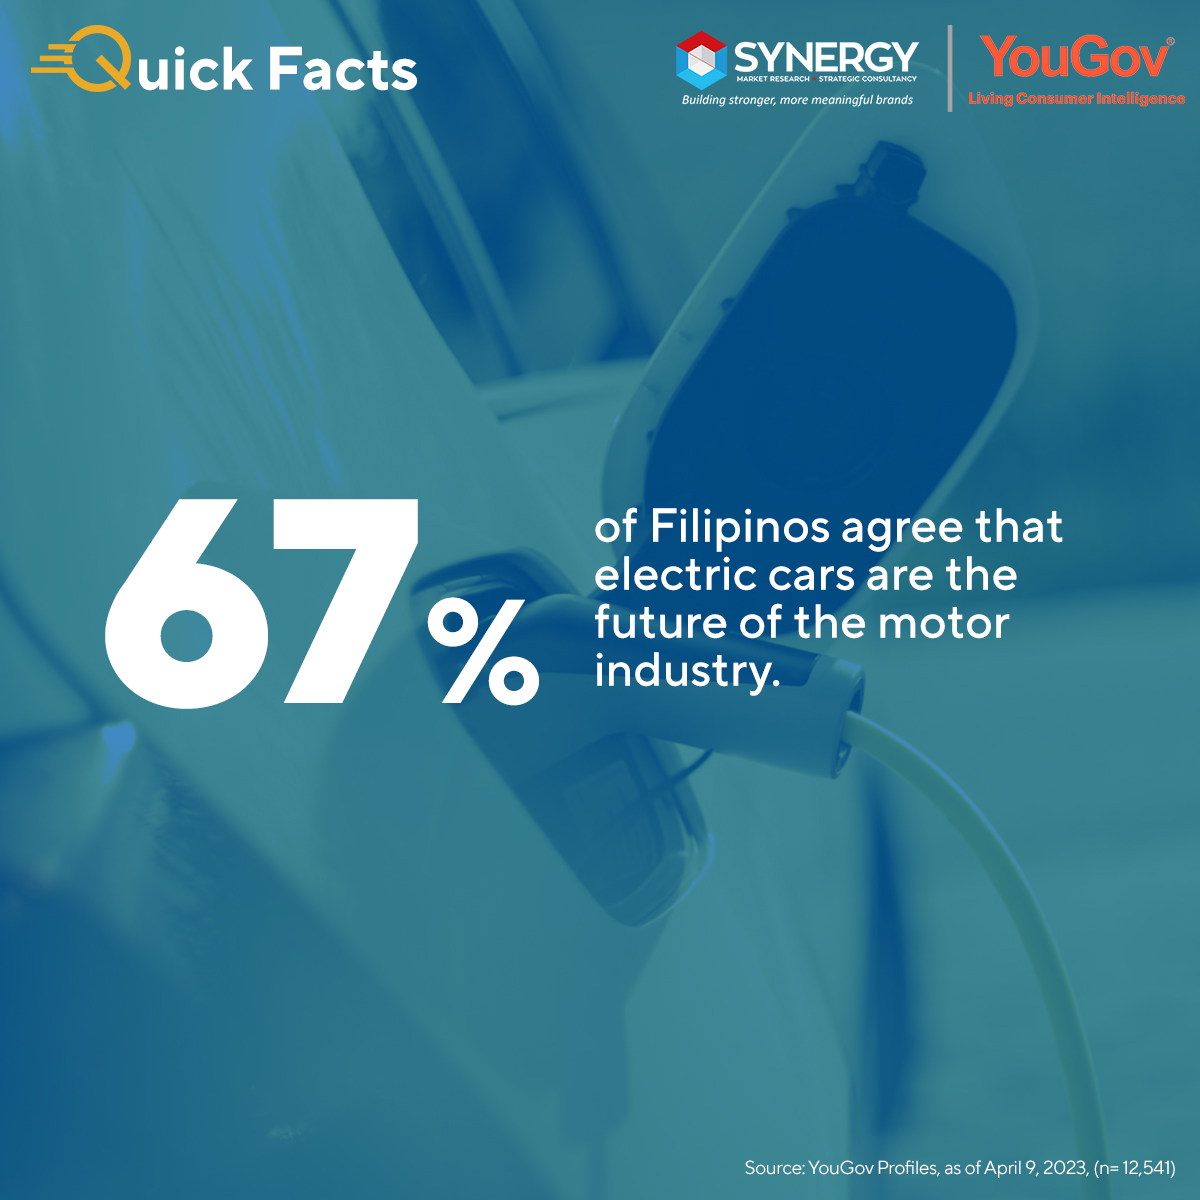 Quick Facts 2023 – Electric Cars